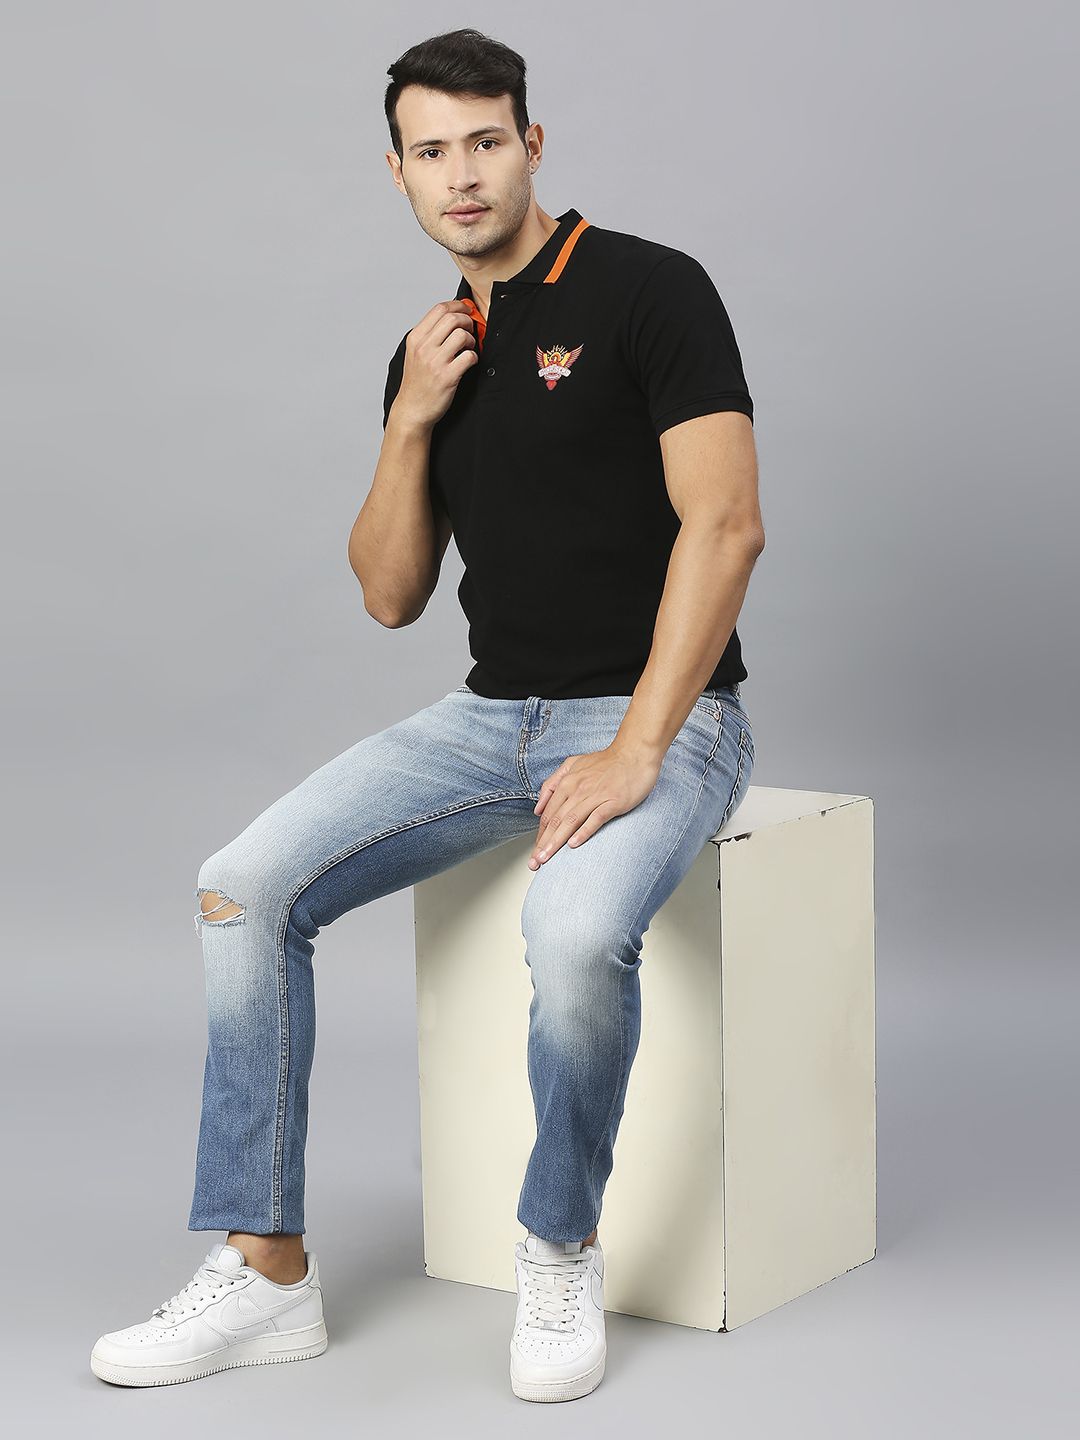 Buy Men Black Printed Round Neck T-Shirts From Fancode Shop.